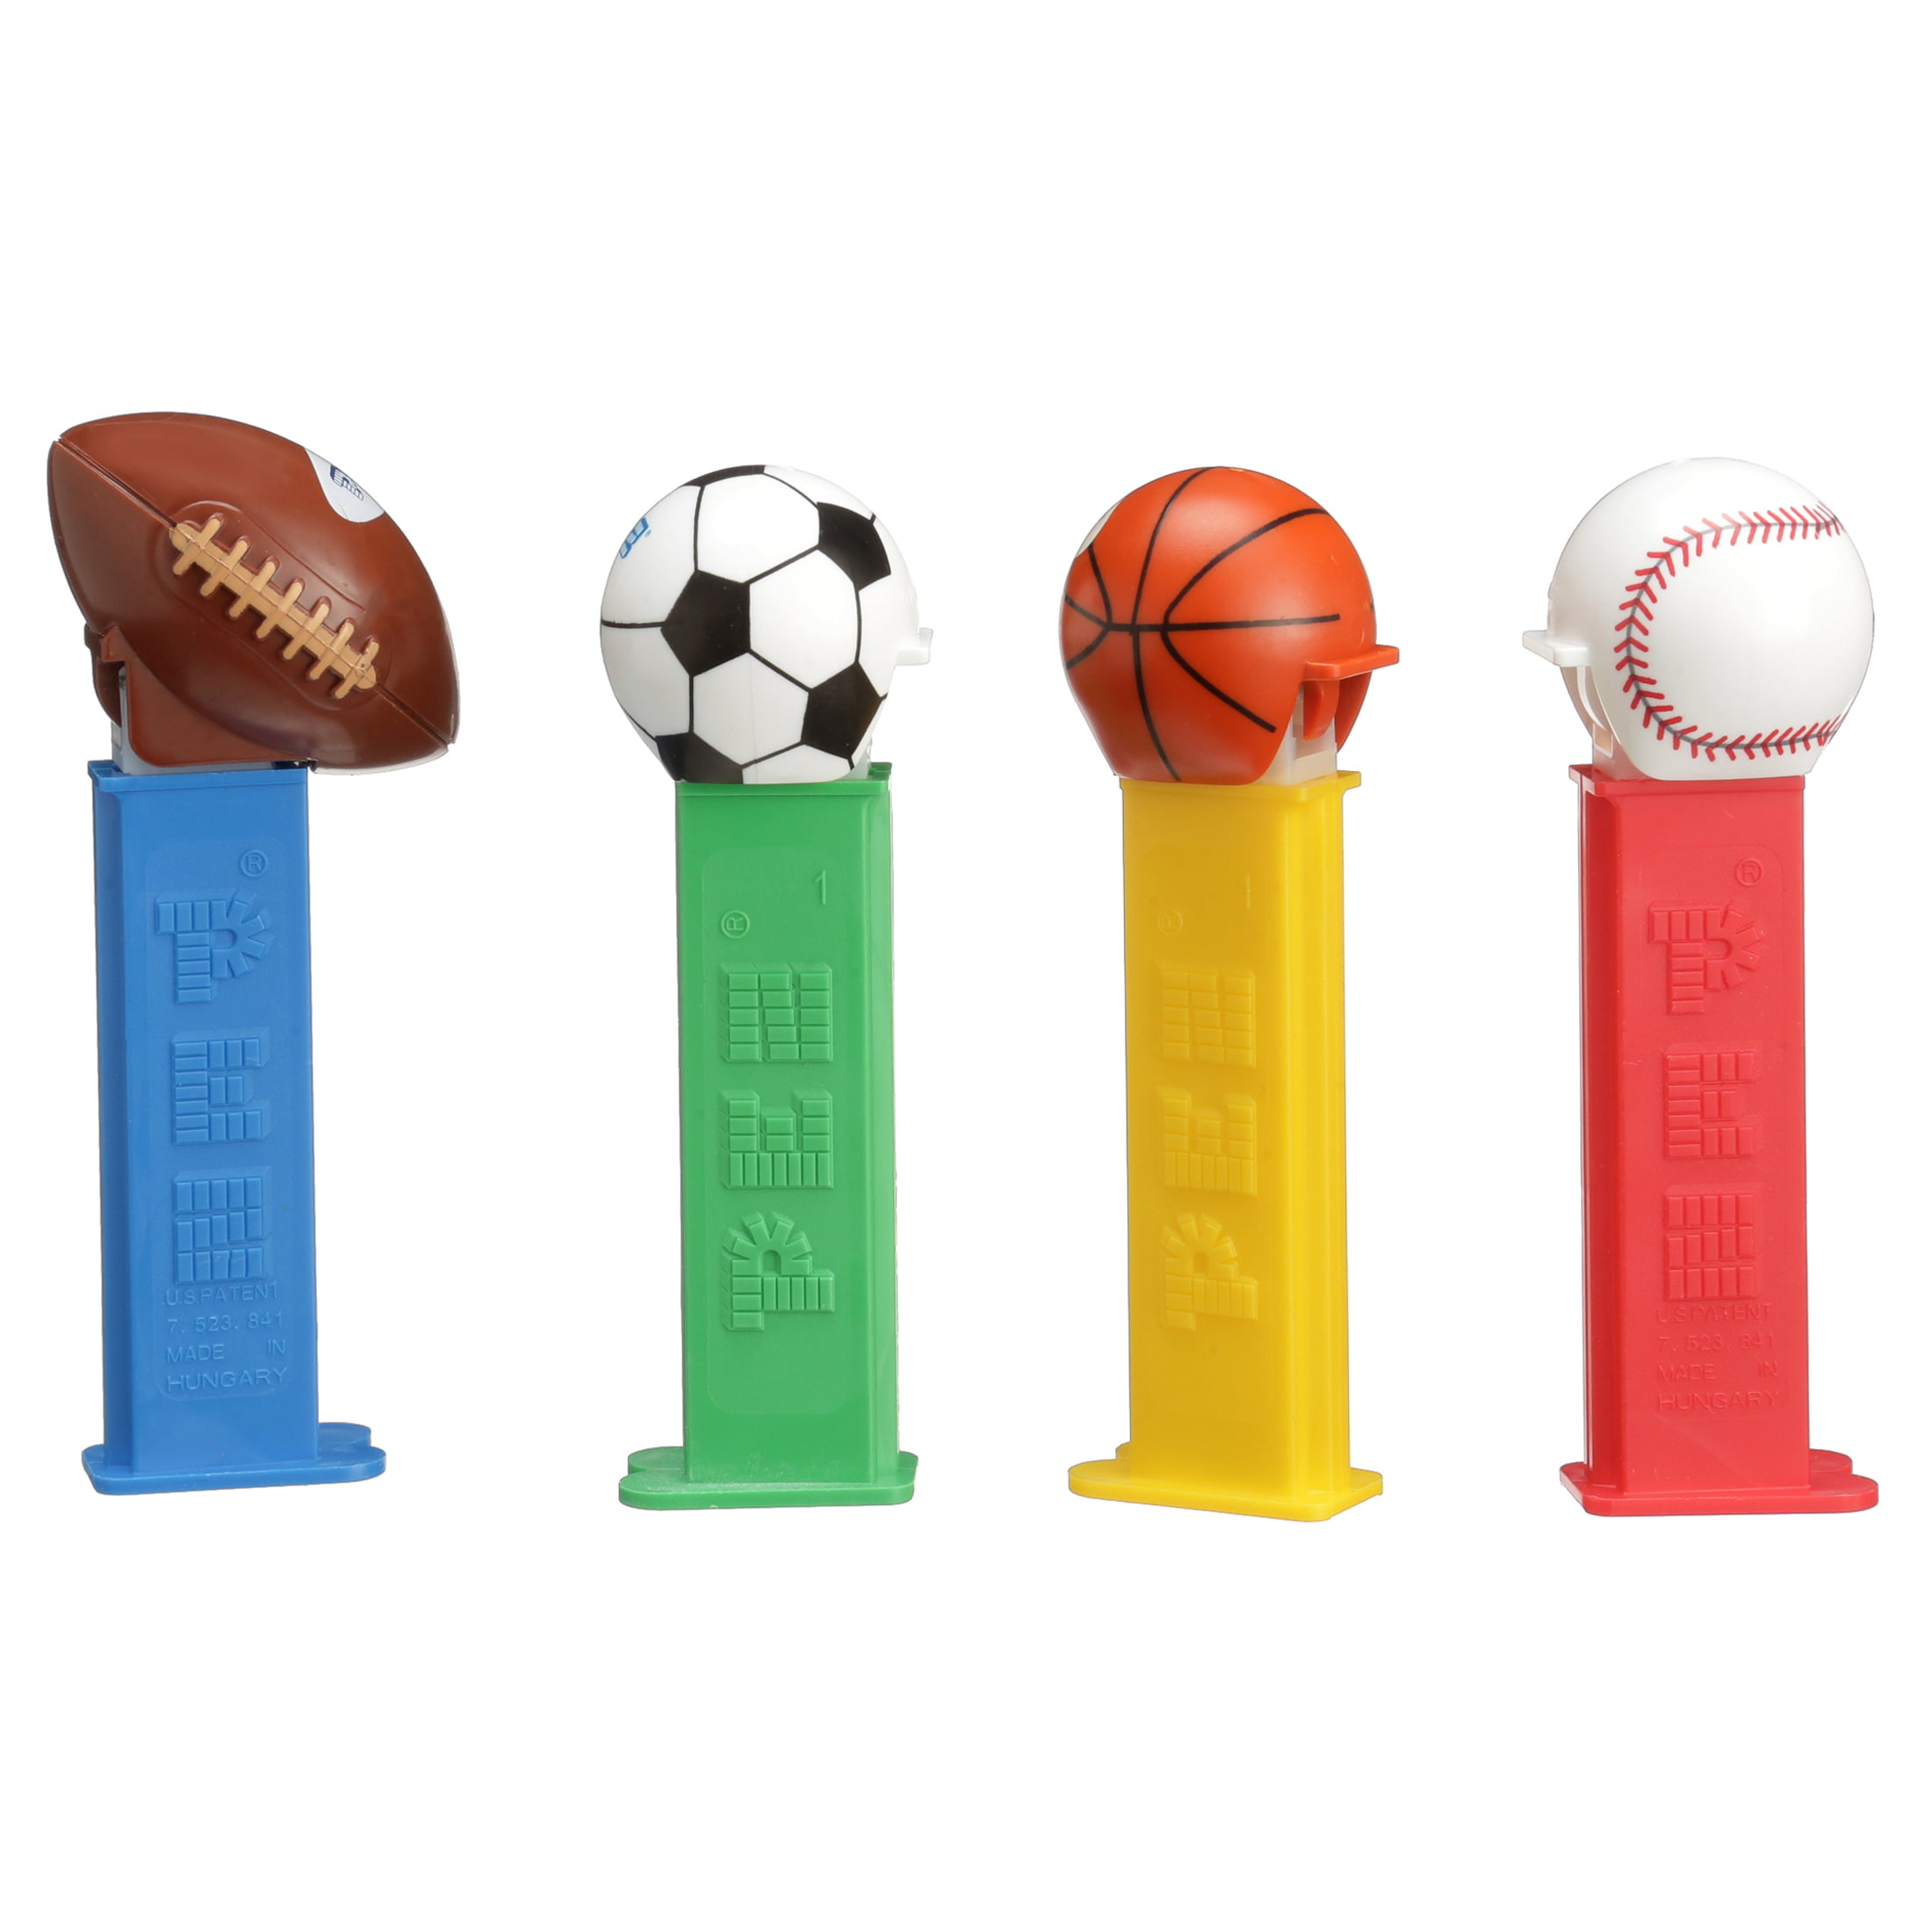 PEZ ►► SPORTS set of 5 and full football candy box Europe ◄◄ TOP 